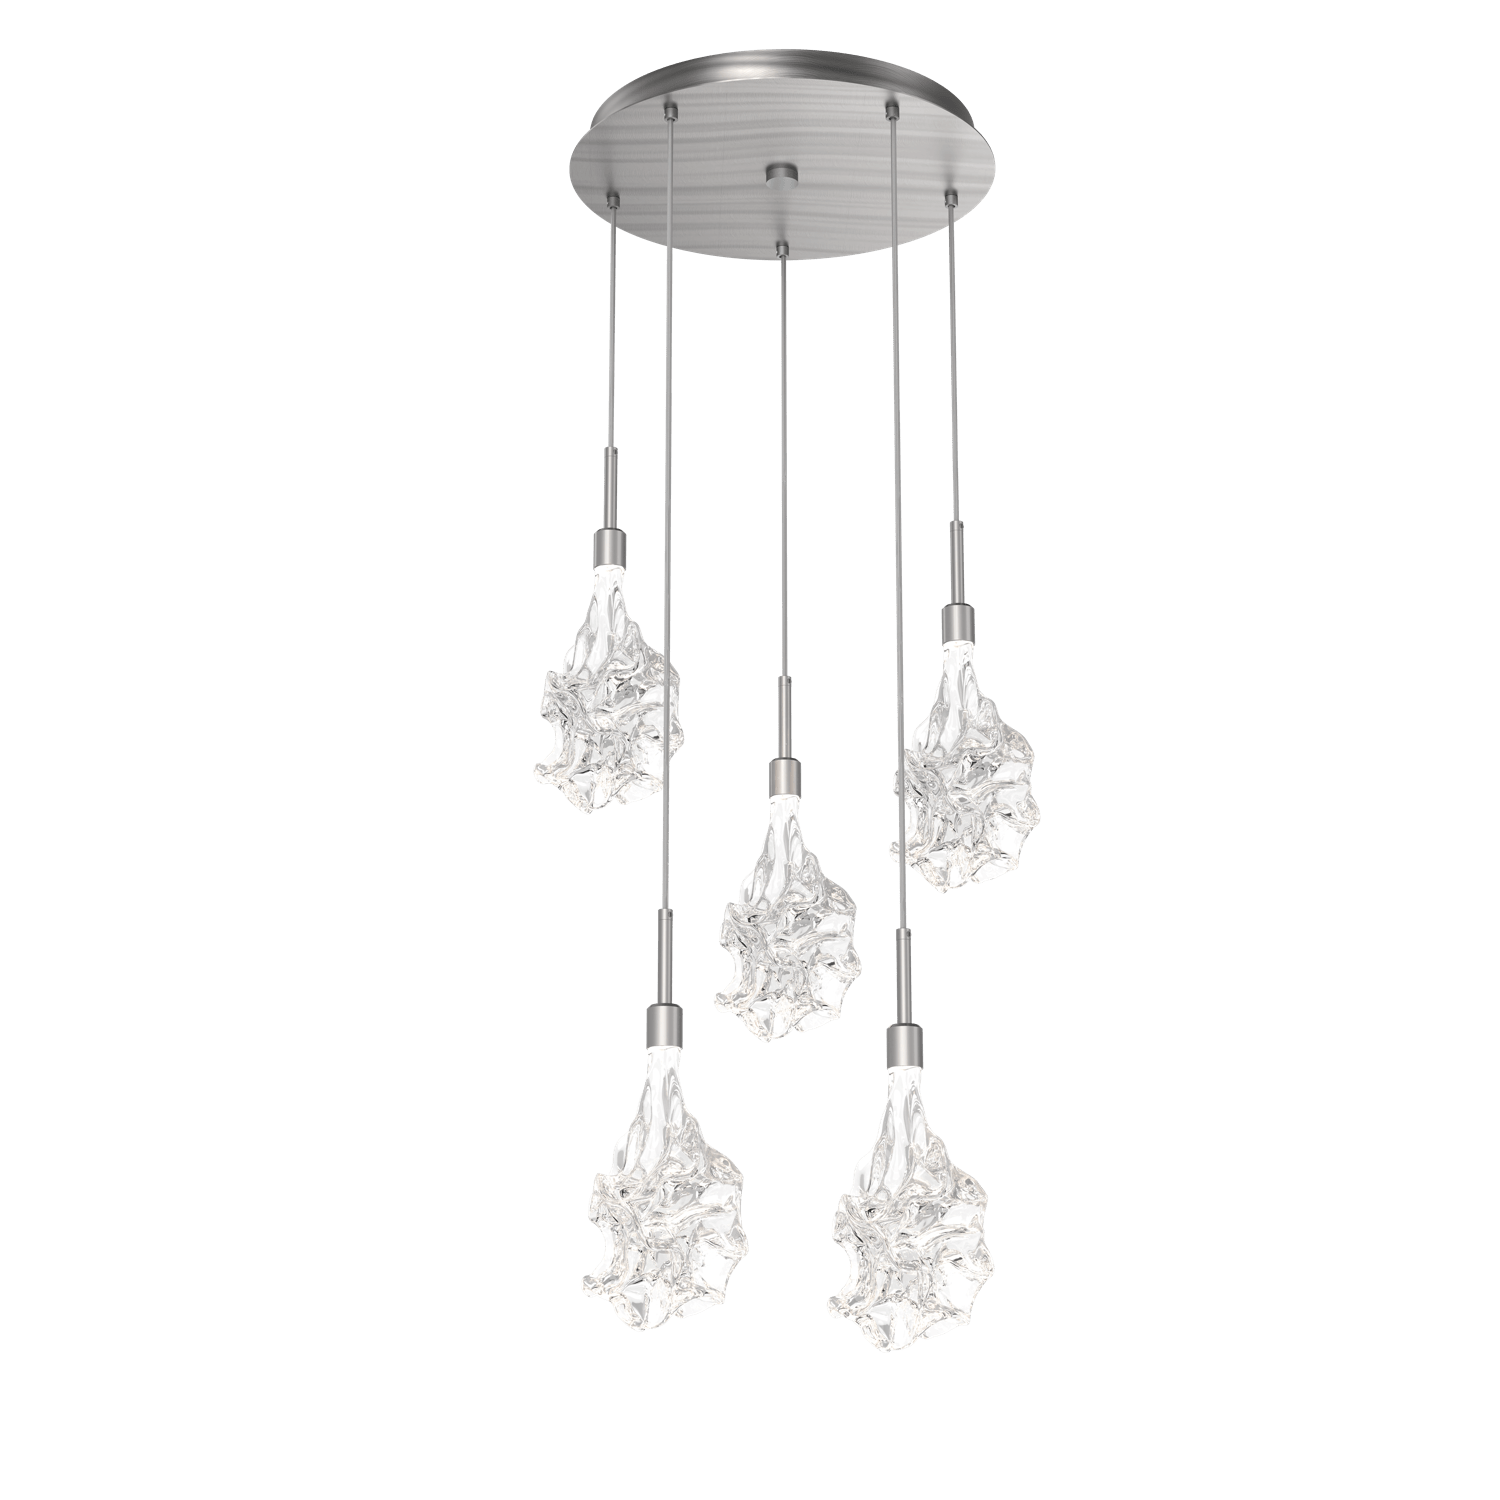 CHB0059-05-SN-Hammerton-Studio-Blossom-5-light-round-pendant-chandelier-with-satin-nickel-finish-and-clear-handblown-crystal-glass-shades-and-LED-lamping